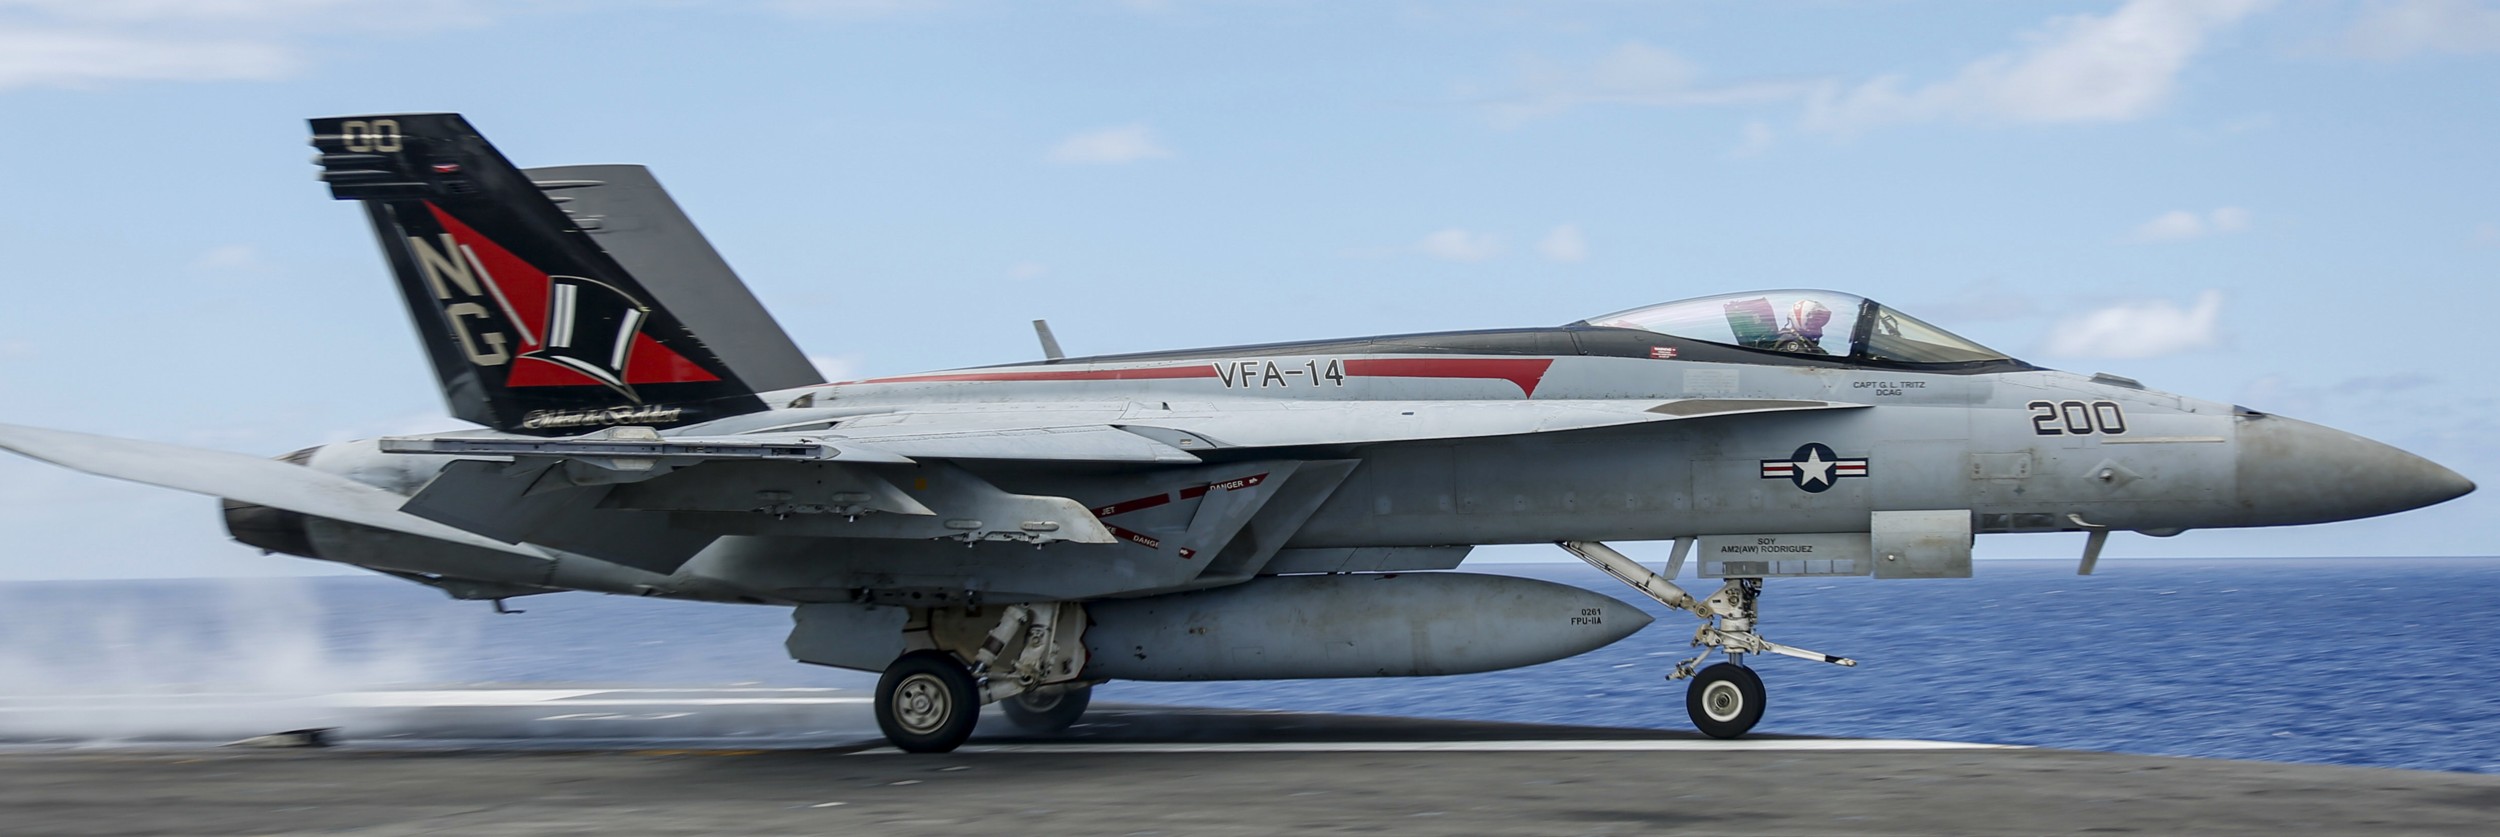 vfa-14 tophatters strike fighter squadron f/a-18e super hornet cvn-72 uss abraham lincoln cvw-9 us navy 96